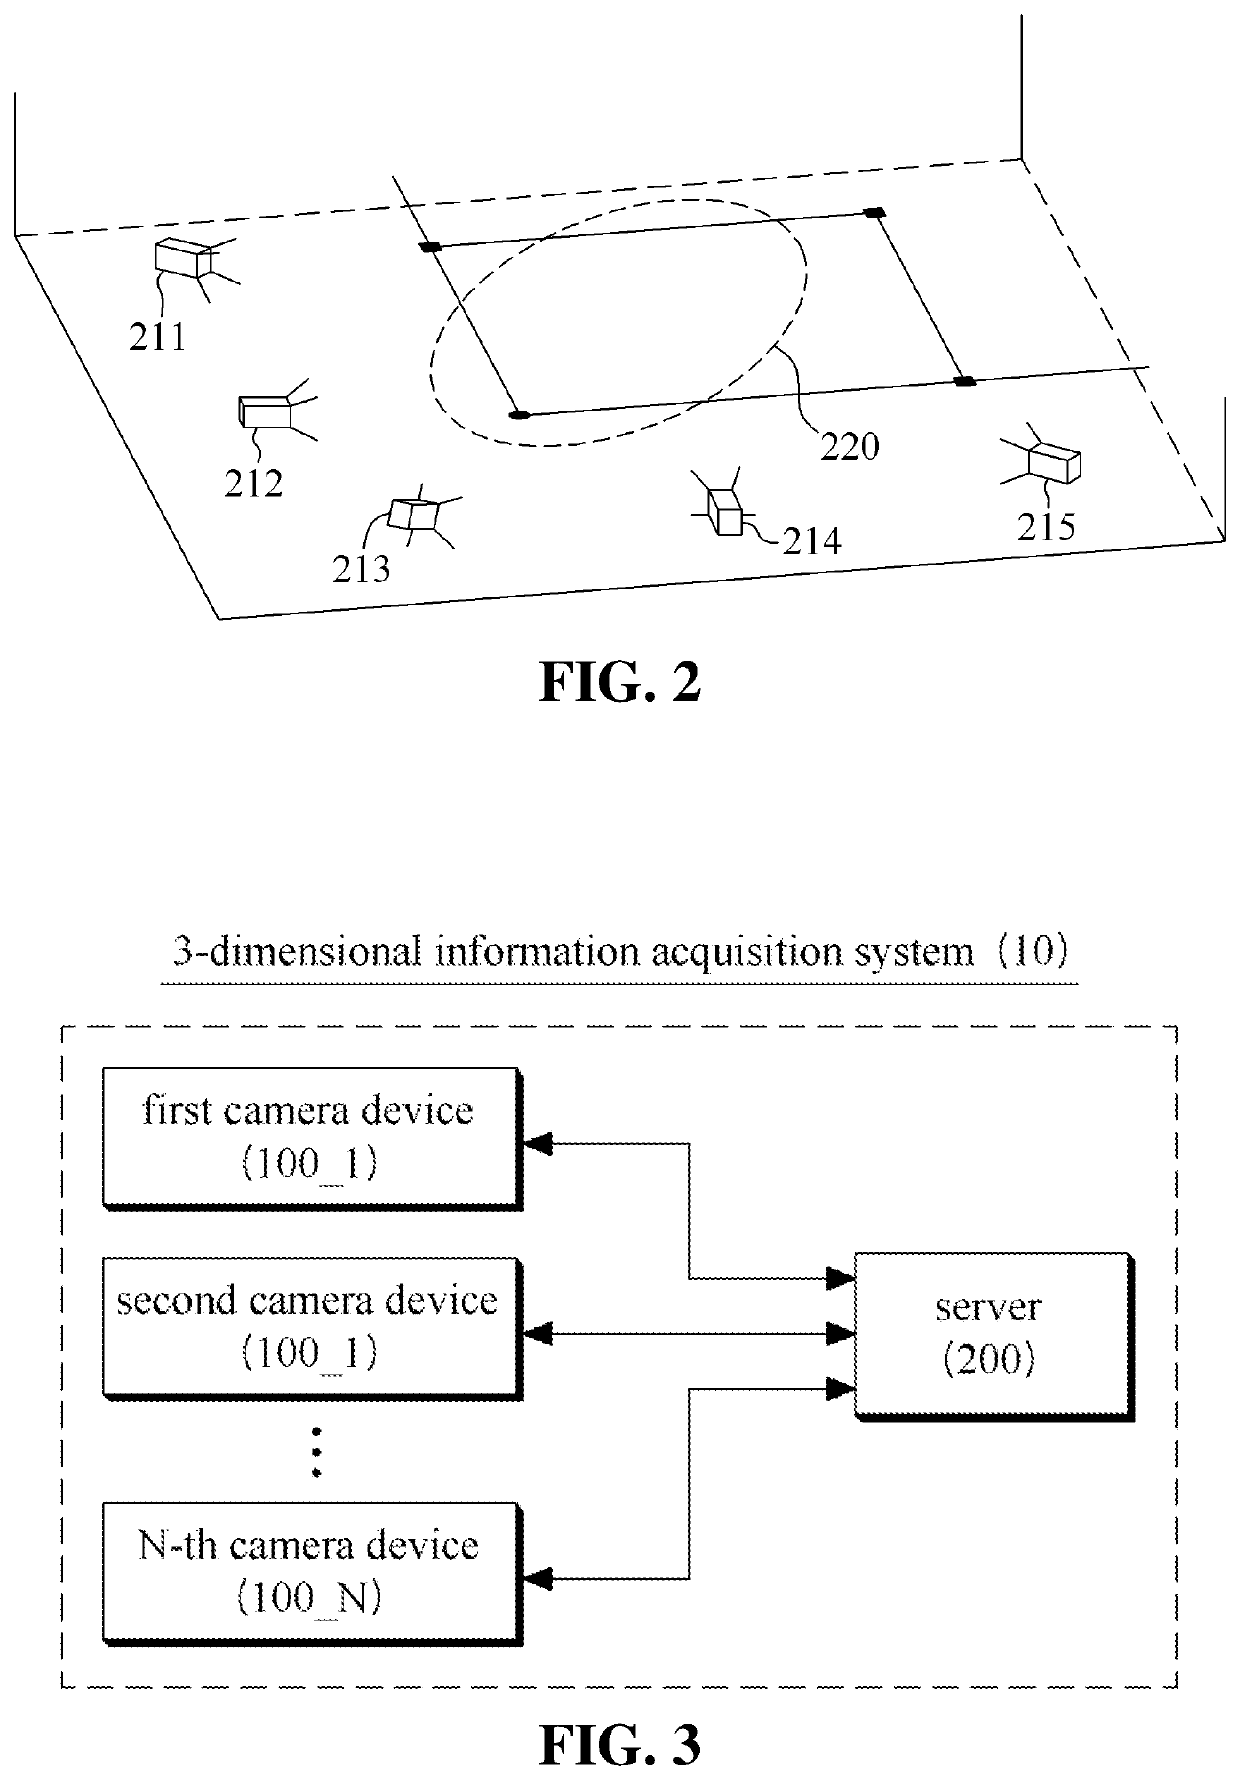 Three-dimensional information acquisition system using pitching practice, and method for calculating camera parameters